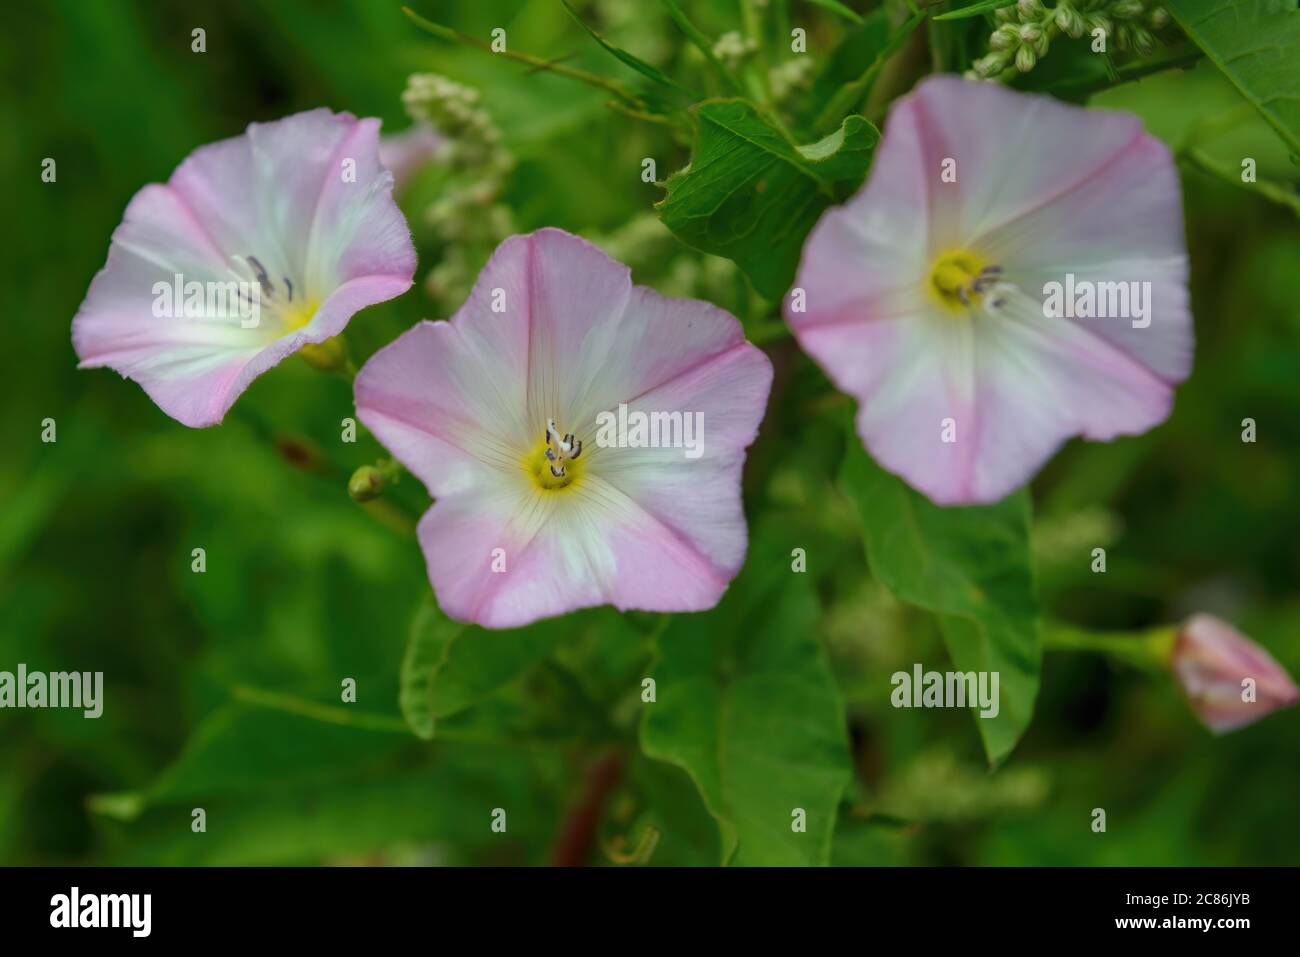 Bindweed flowers, plants with the Latin name Convolvulus arvensis. Stock Photo